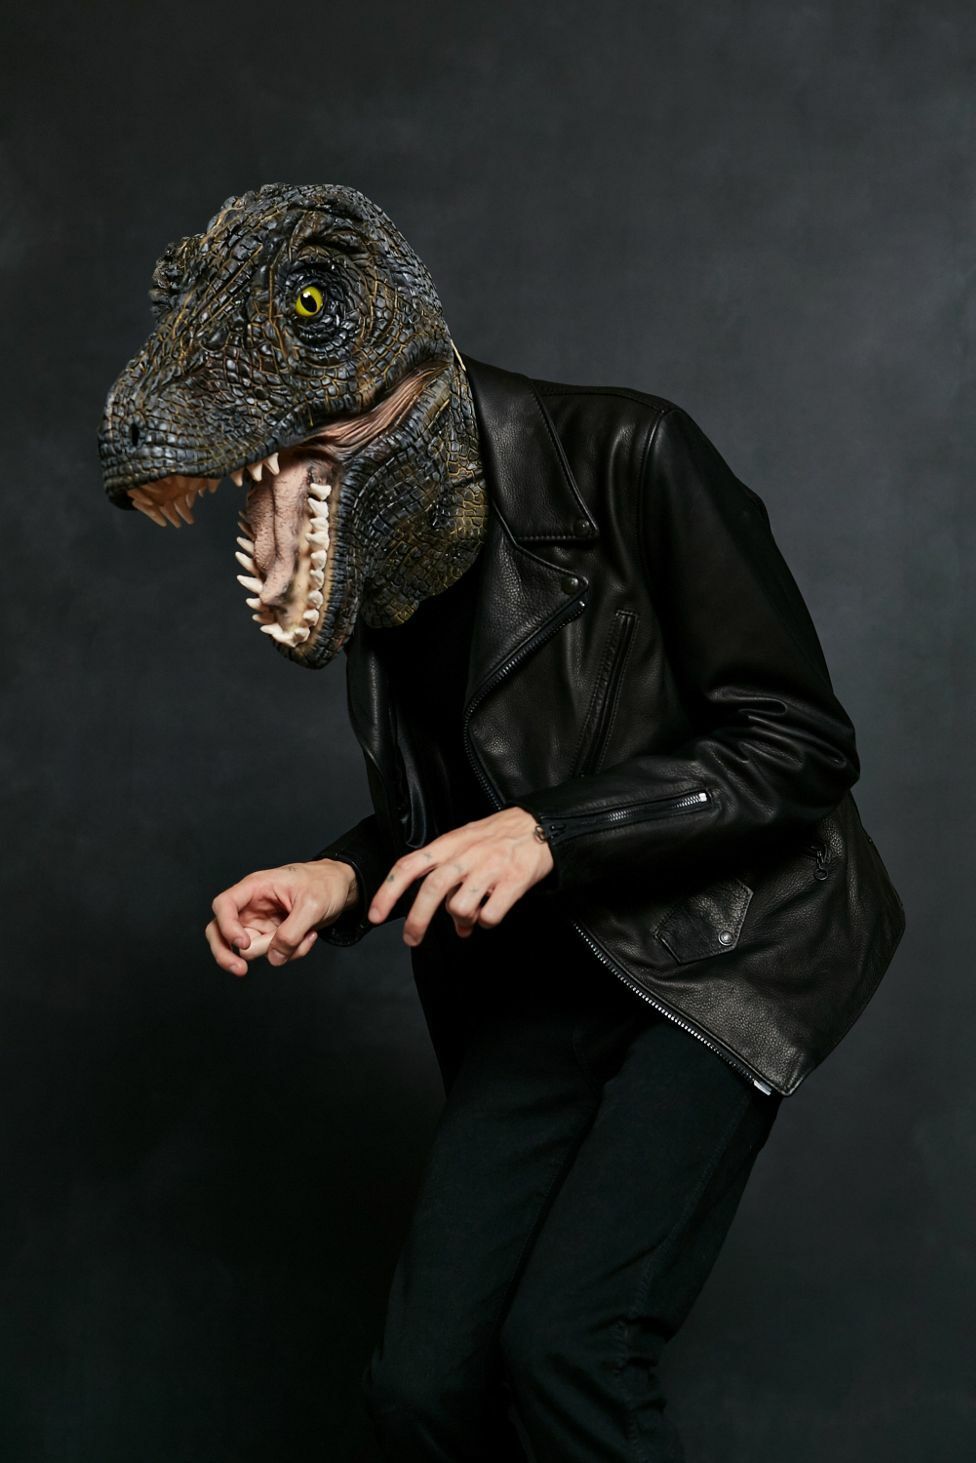 New Urban outfitters Bigmouth T-Rex Mask MSRP: $42 LATEX